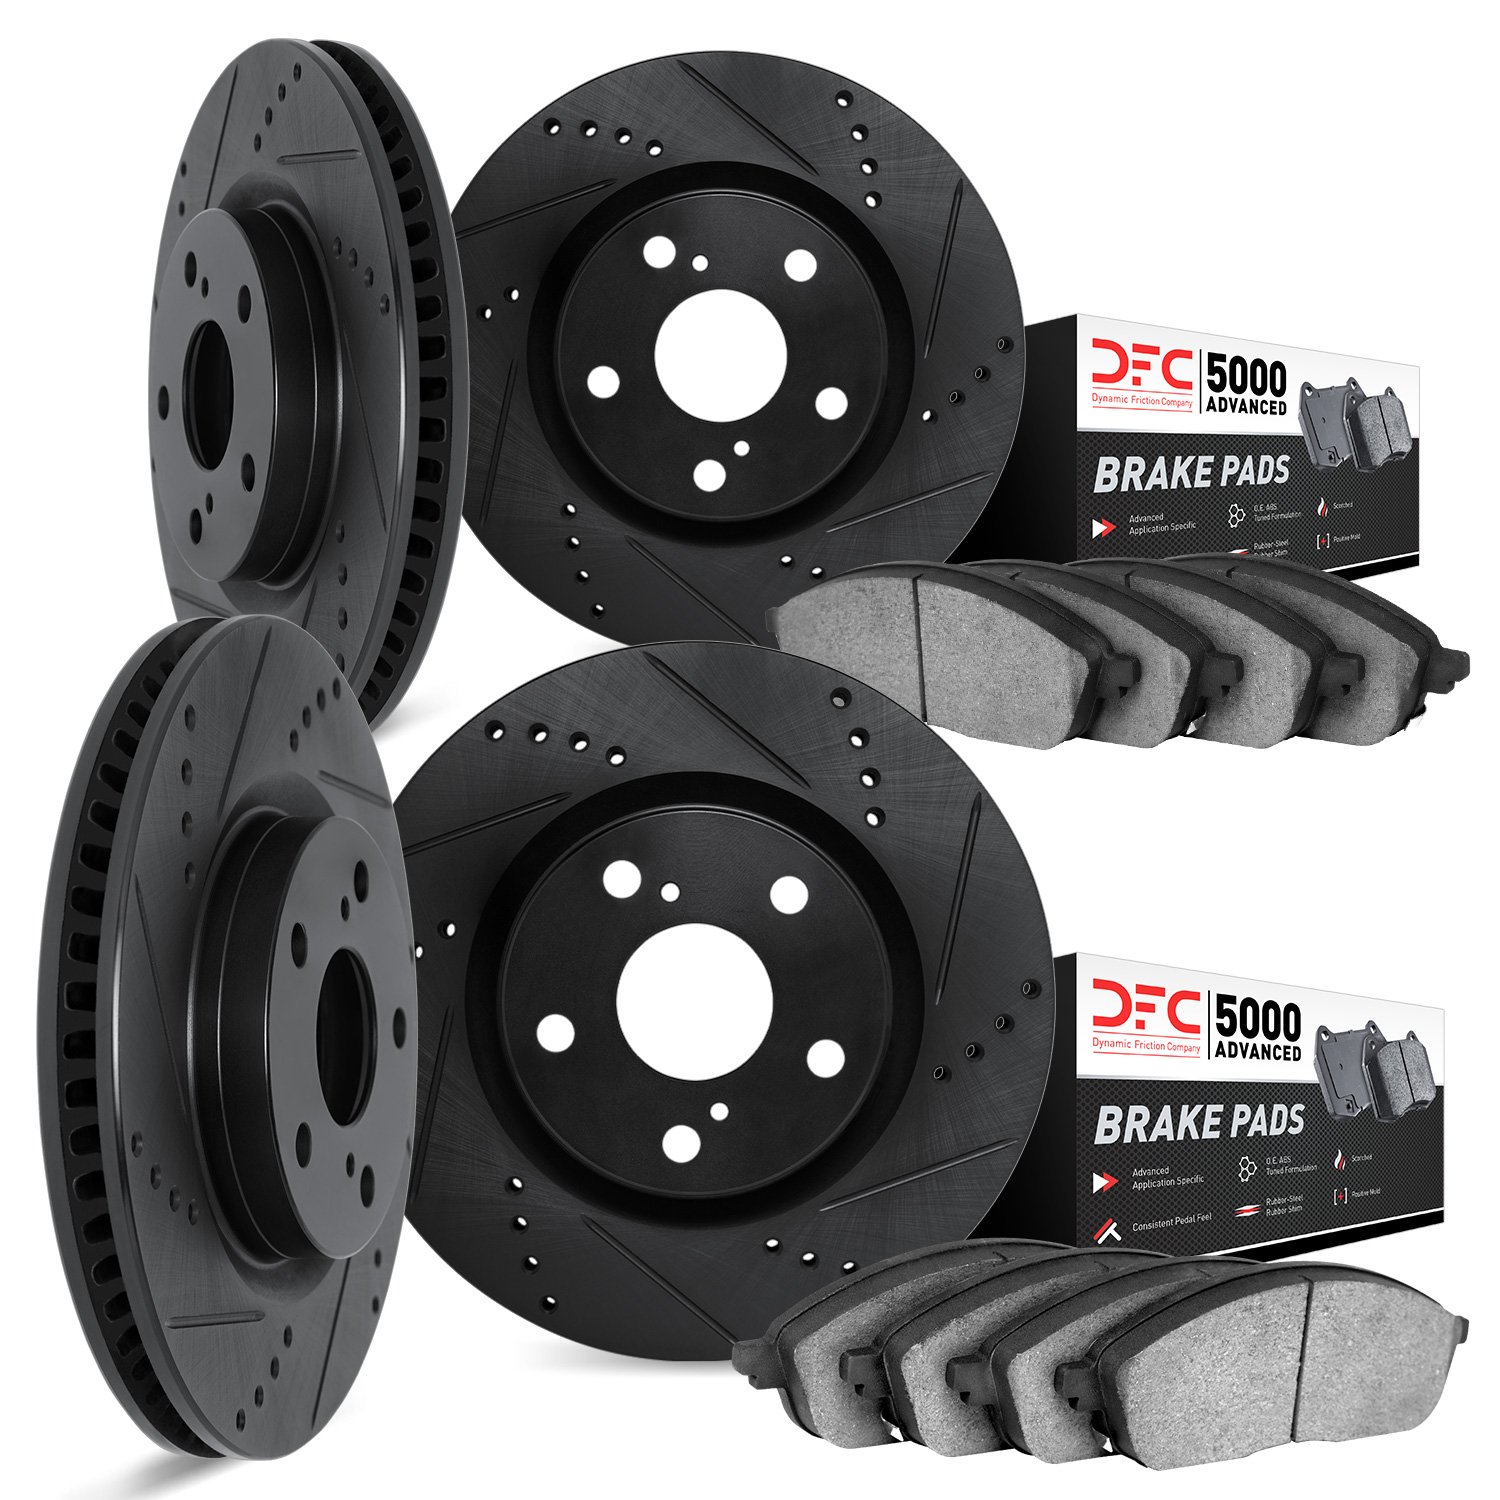 8504-72047 Drilled/Slotted Brake Rotors w/5000 Advanced Brake Pads Kit [Black], 2003-2006 Mitsubishi, Position: Front and Rear